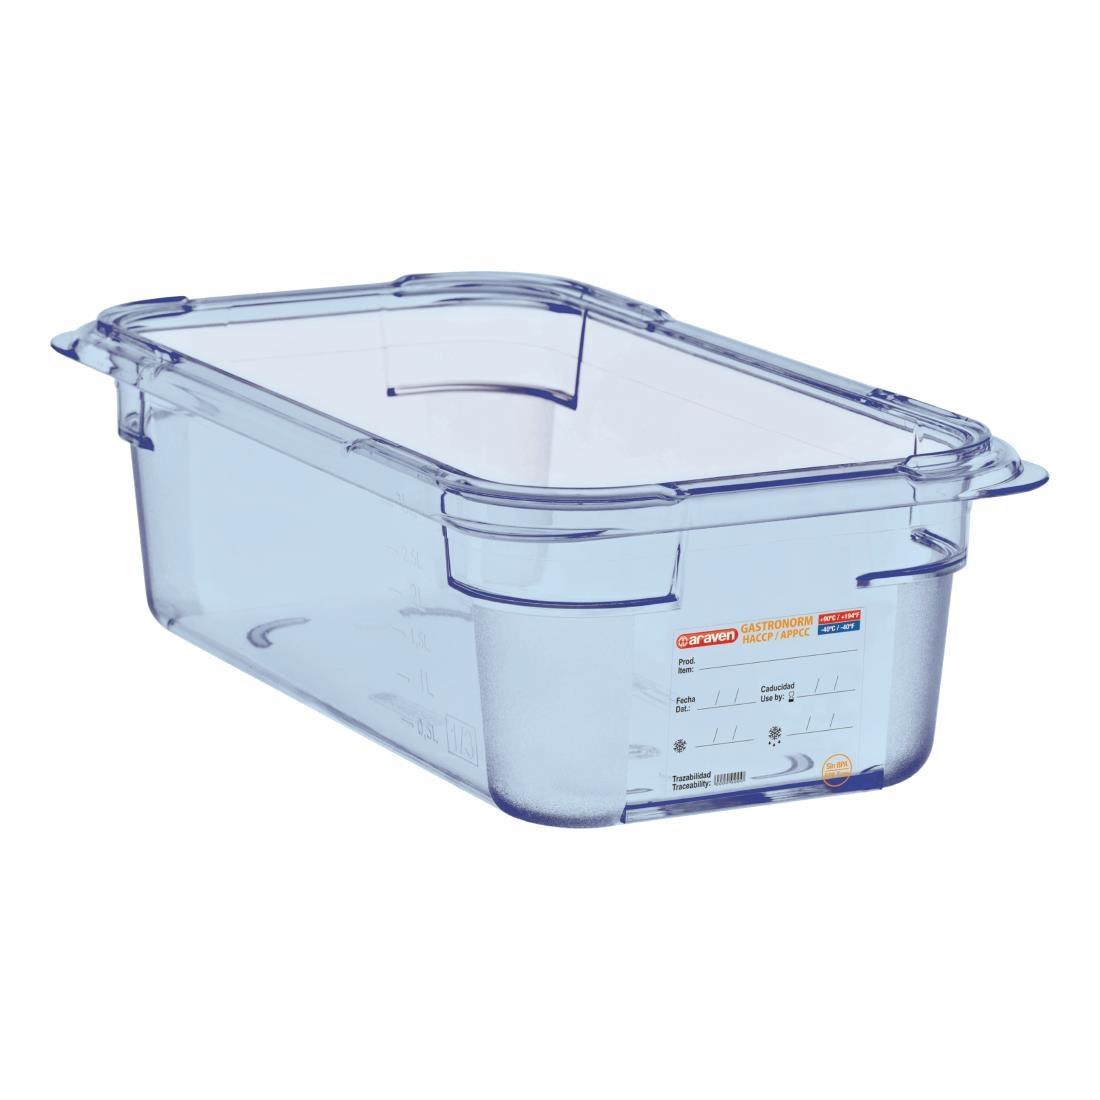 Araven ABS Food Storage Container Blue GN 1/4 100mm - GP575  - 1